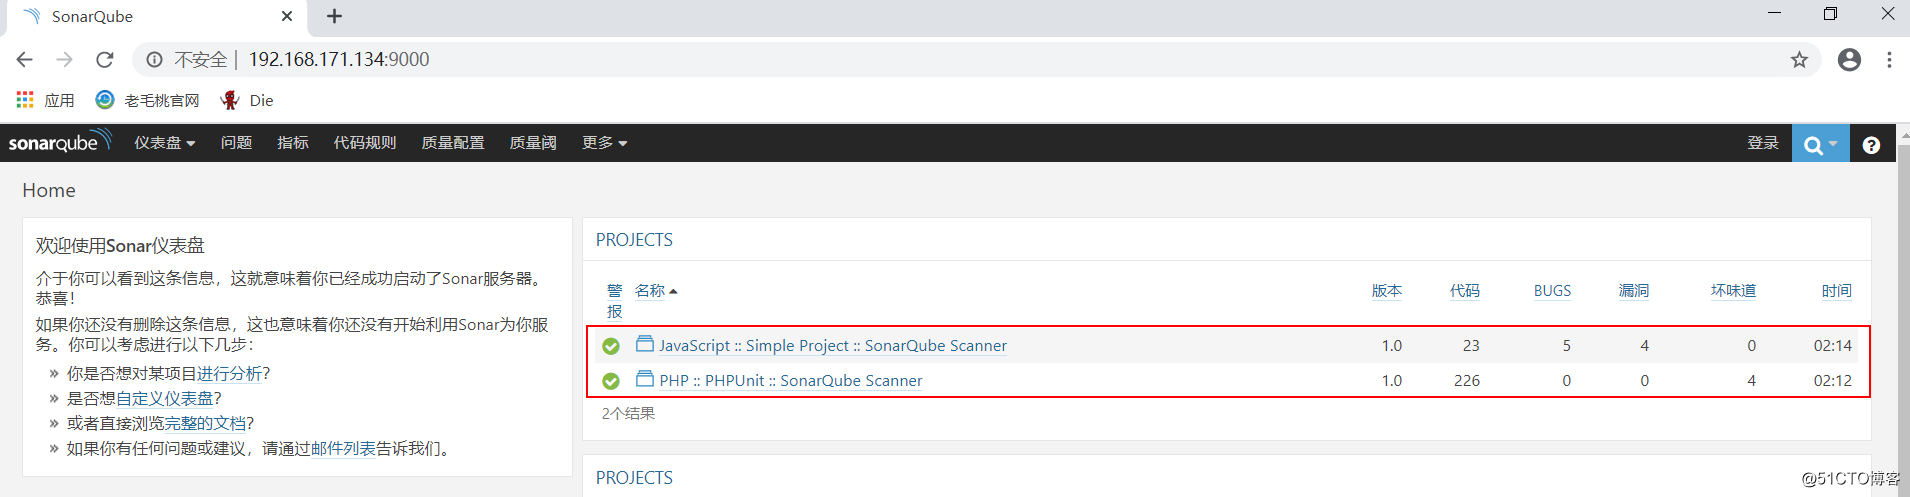 Continuous integration of code quality management --- Sonar